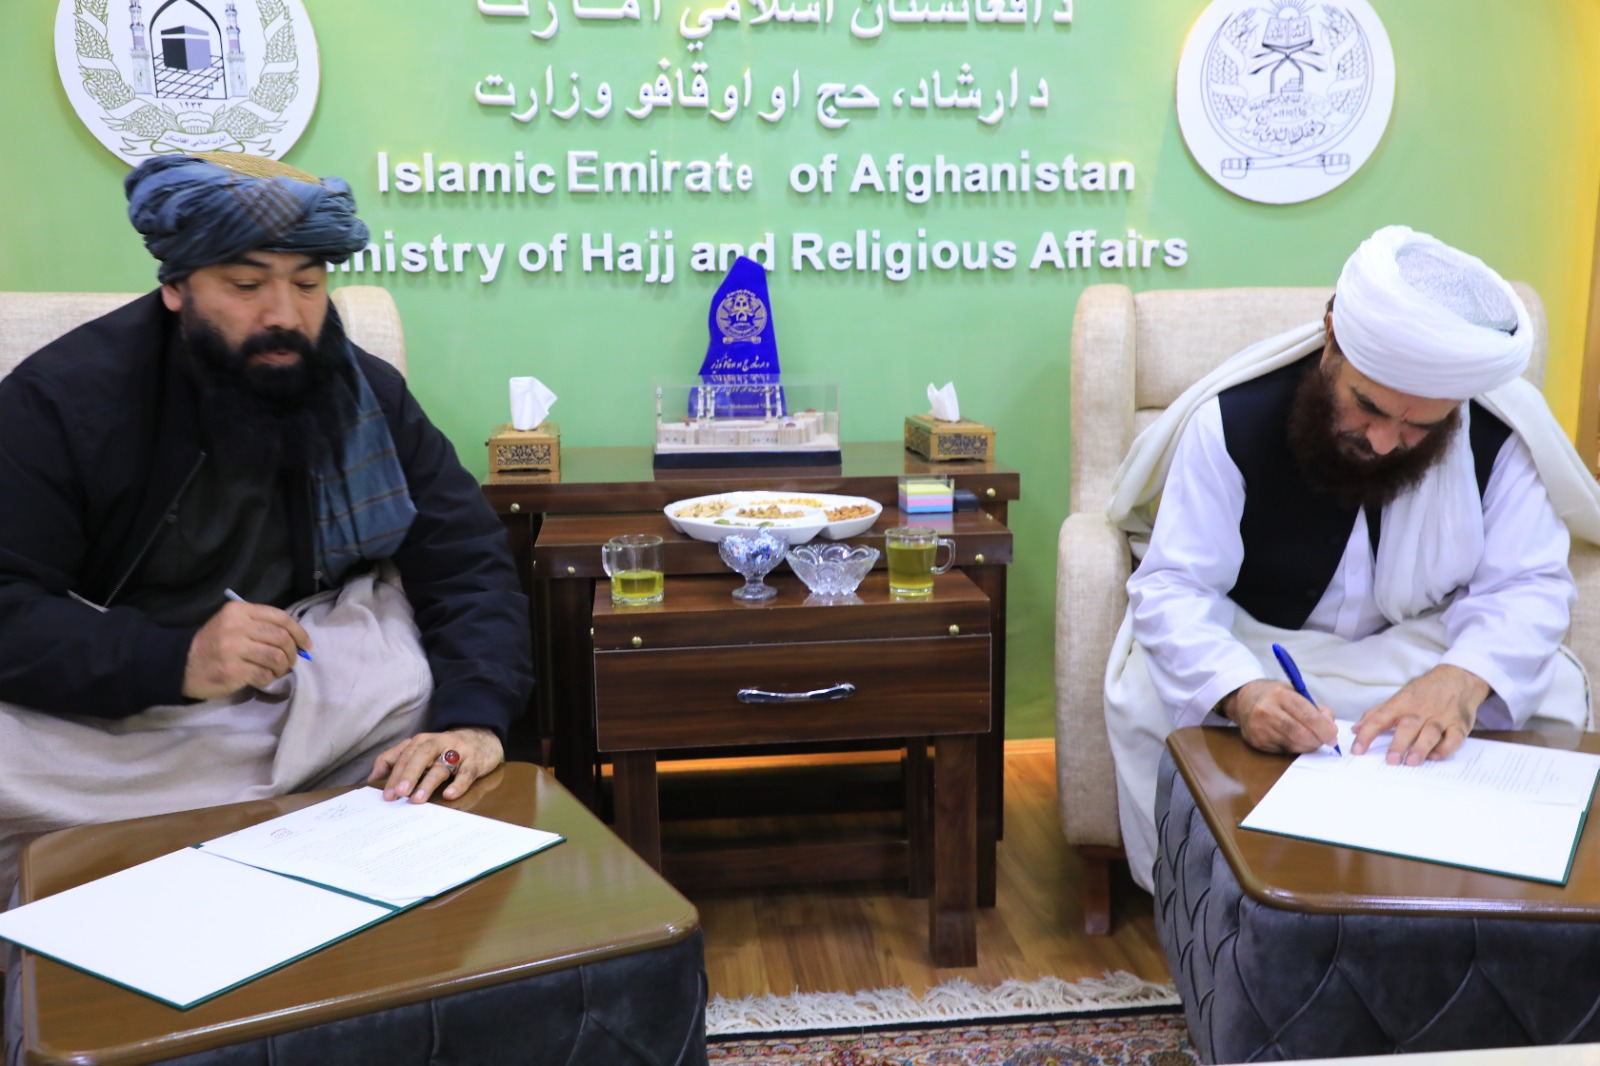 The round-trip contract for the pilgrims of the year 1445 H was separately contracted with Ariana Afghan Airlines and Kam Air.